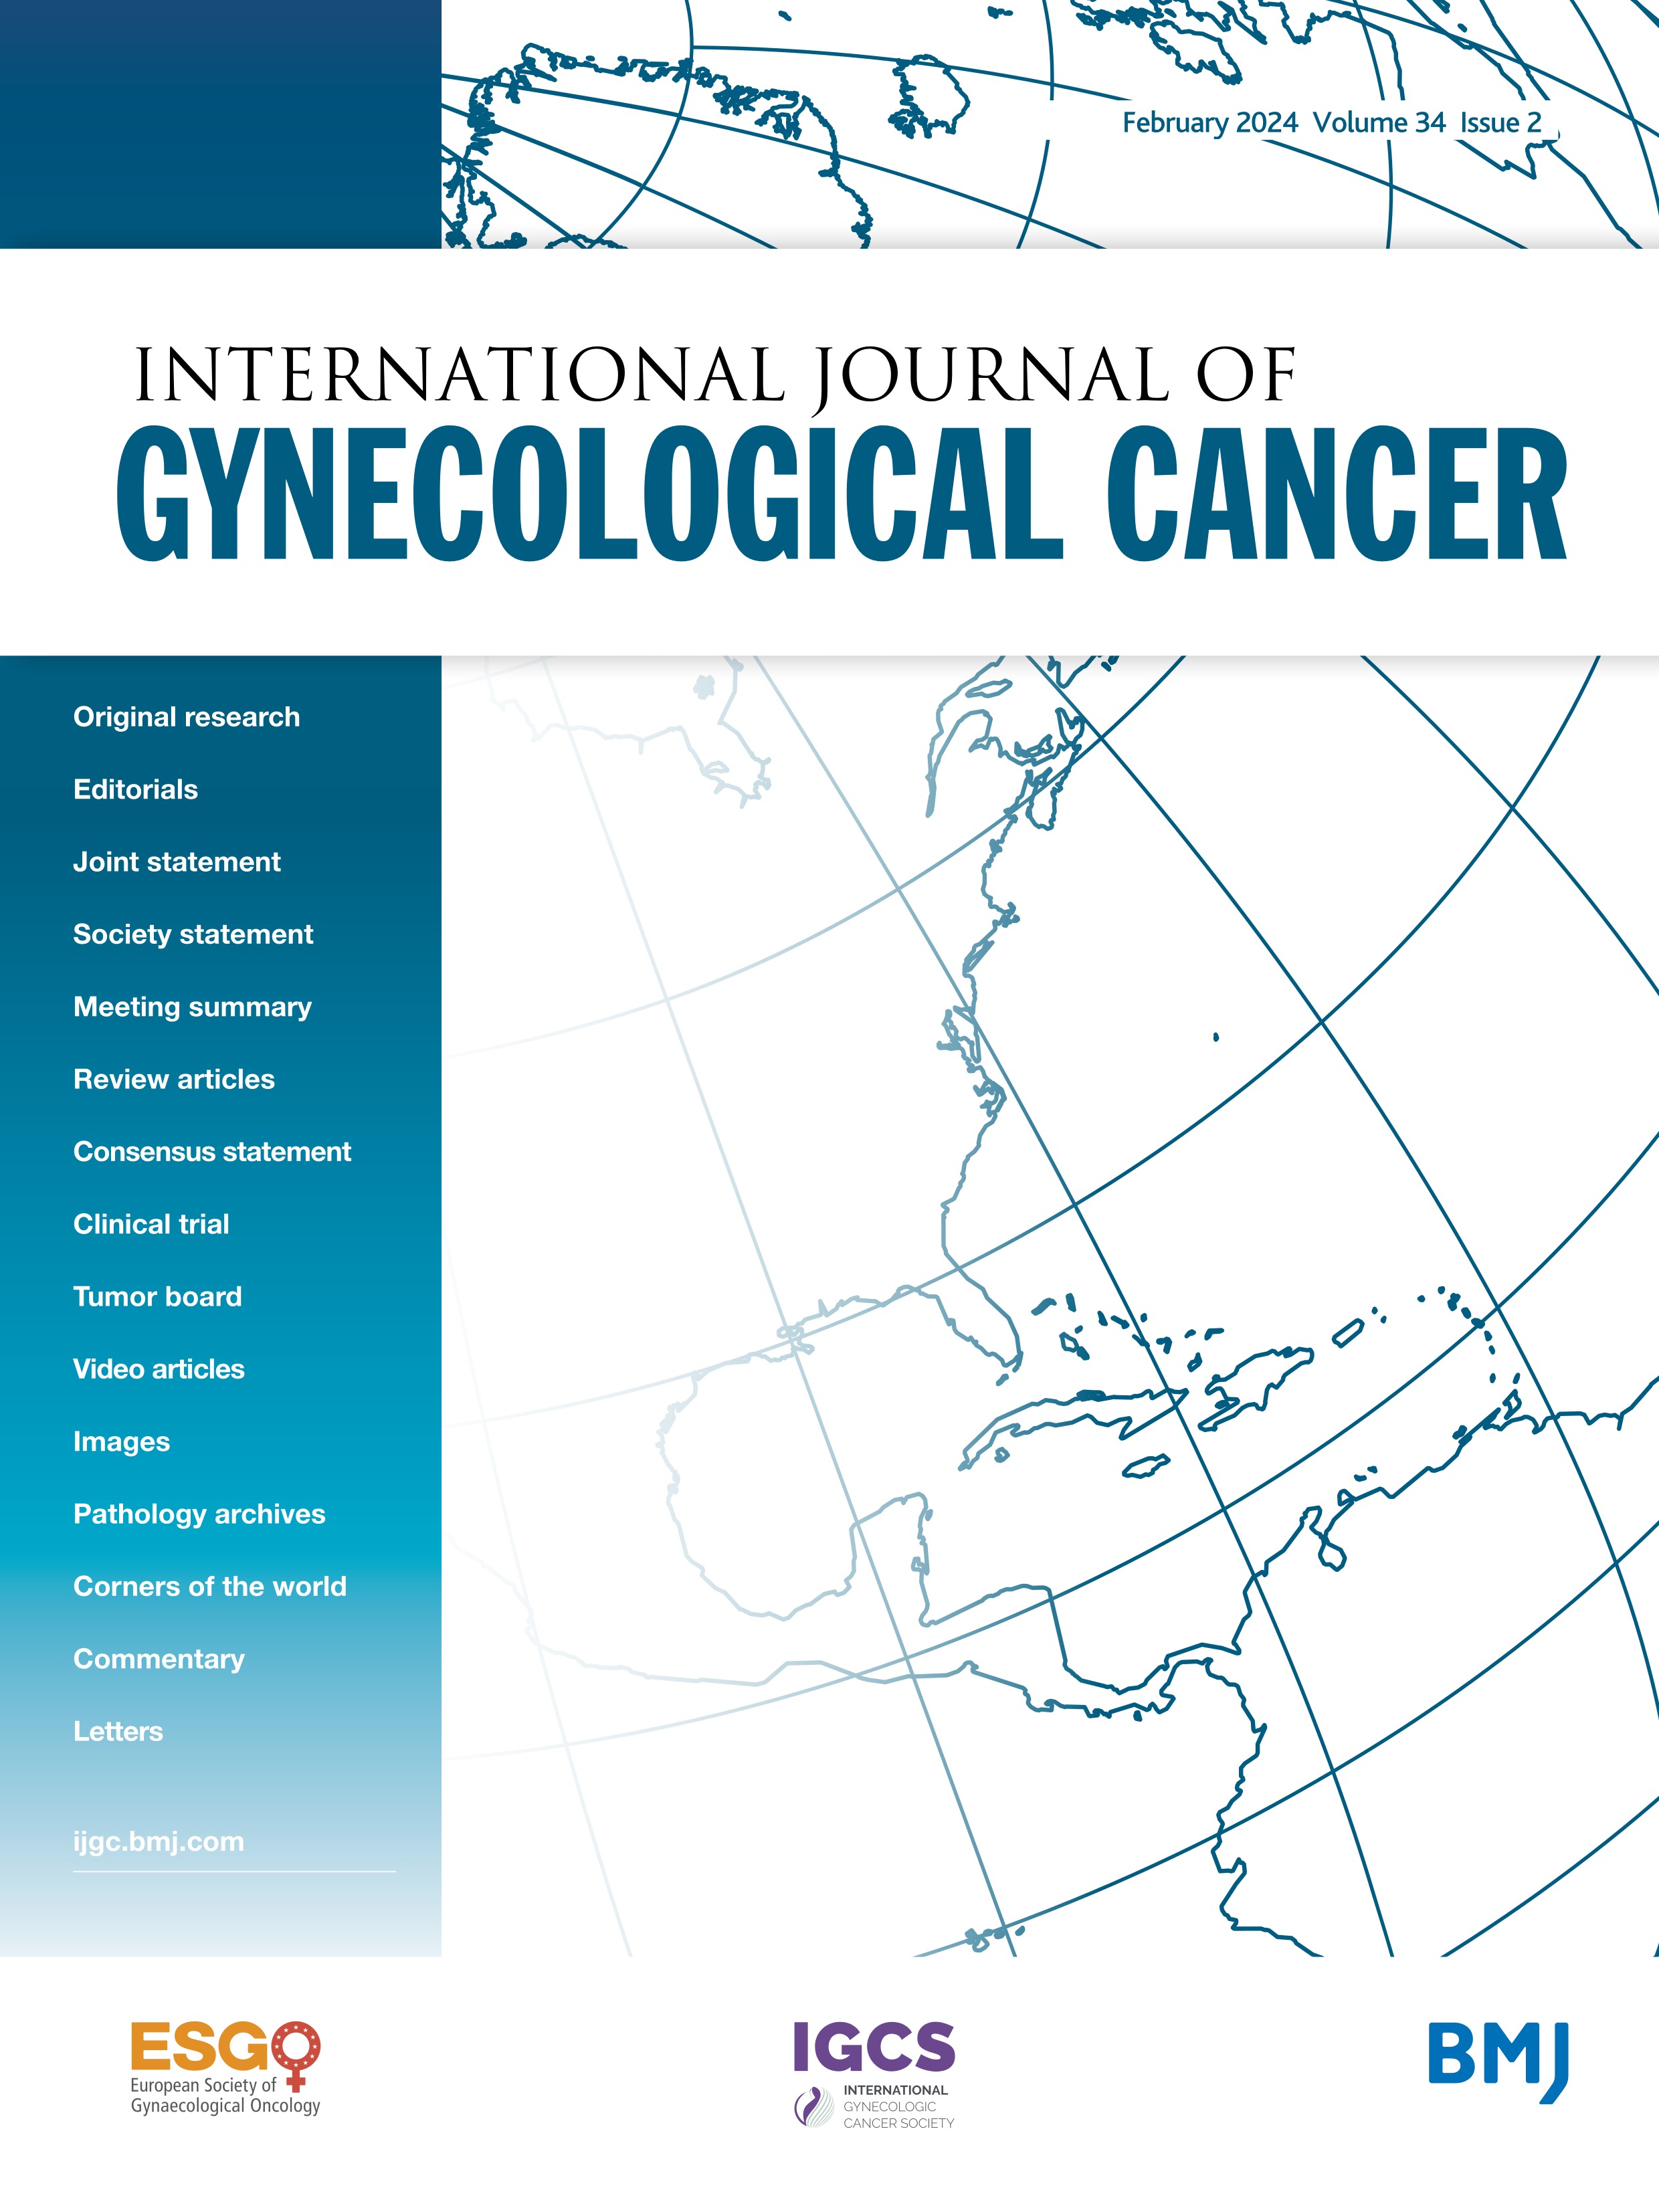 HPV testing as an effective triage strategy in the follow-up after fertility-sparing treatment for glandular lesions of the uterine cervix